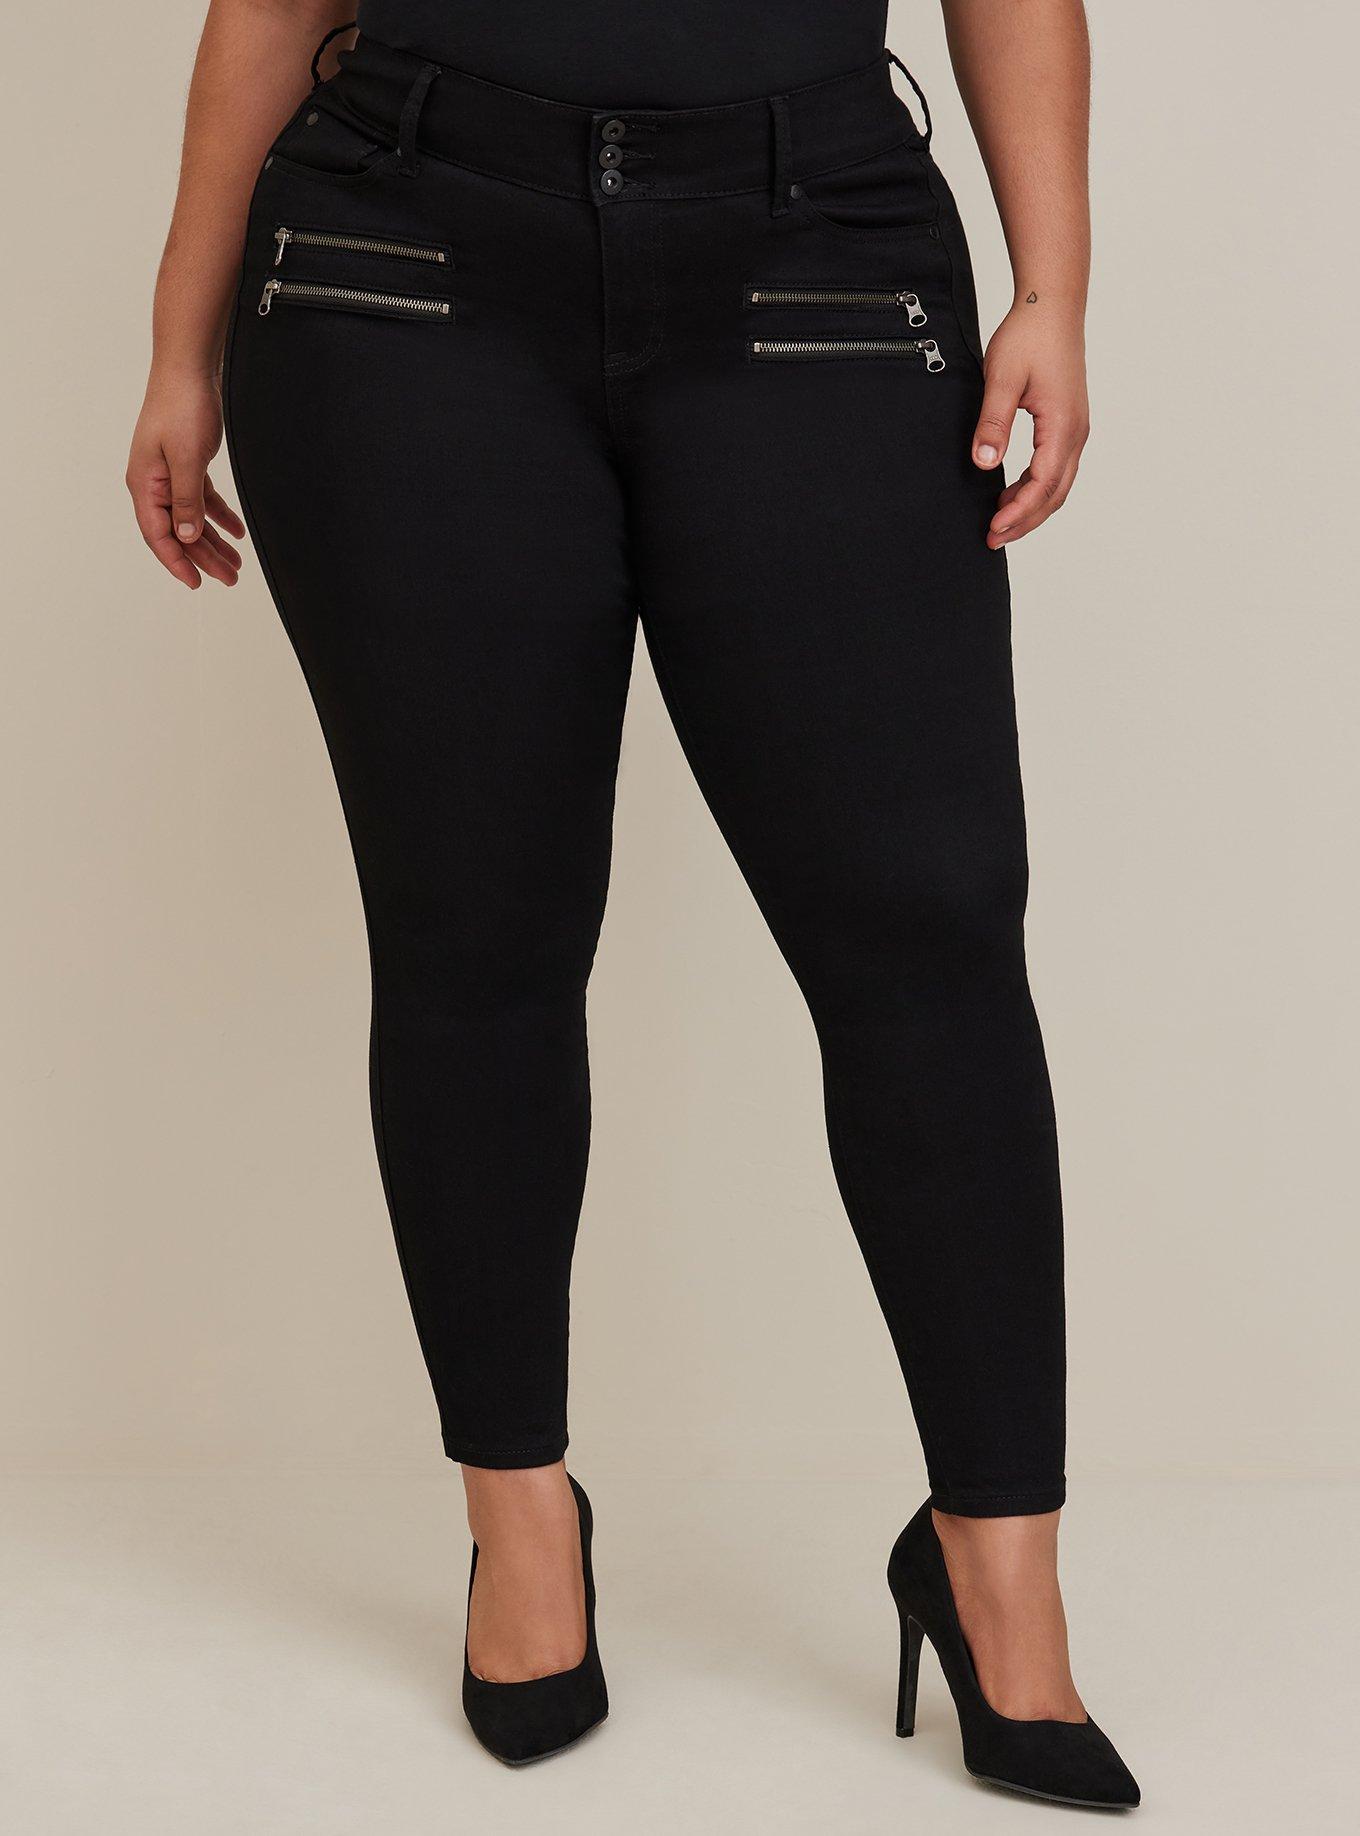 Buy online Multi Colored Jegging Jeggings from Jeans & jeggings